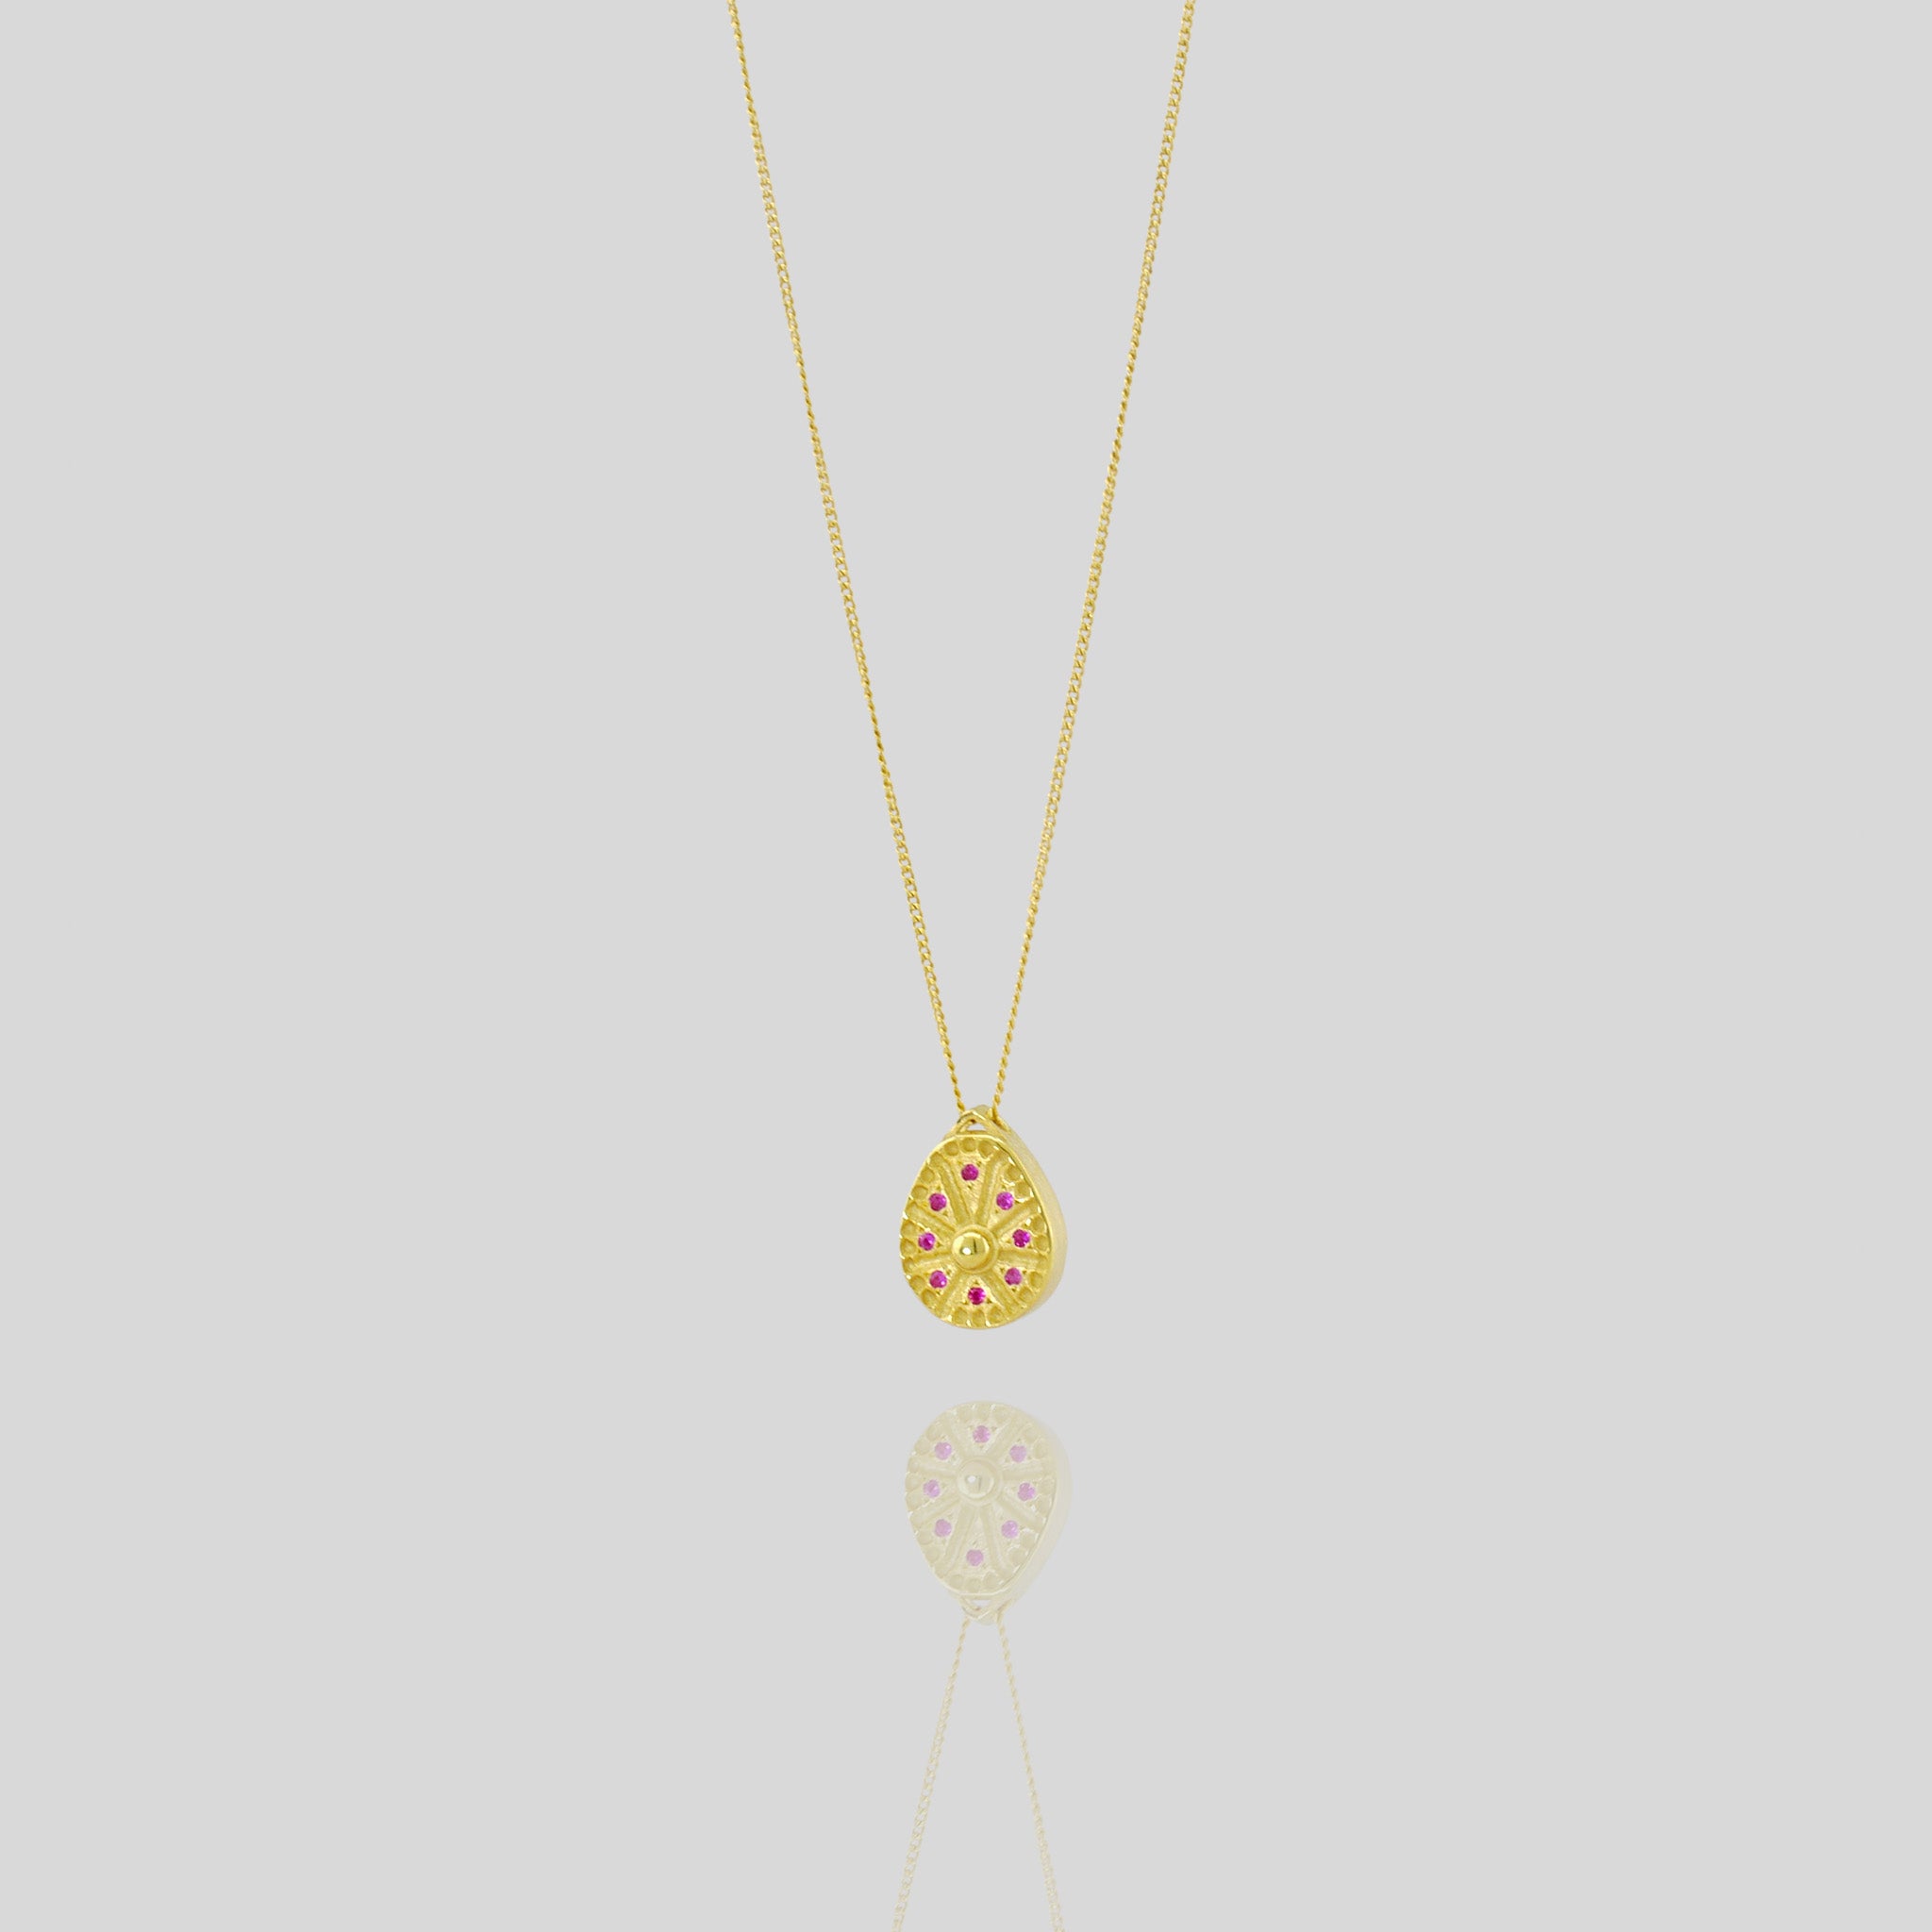 18k Gold pendant resembling a Sundial clock, accented with small Rubies between the edges of each clock hand. A luxurious and timeless addition to any collection.